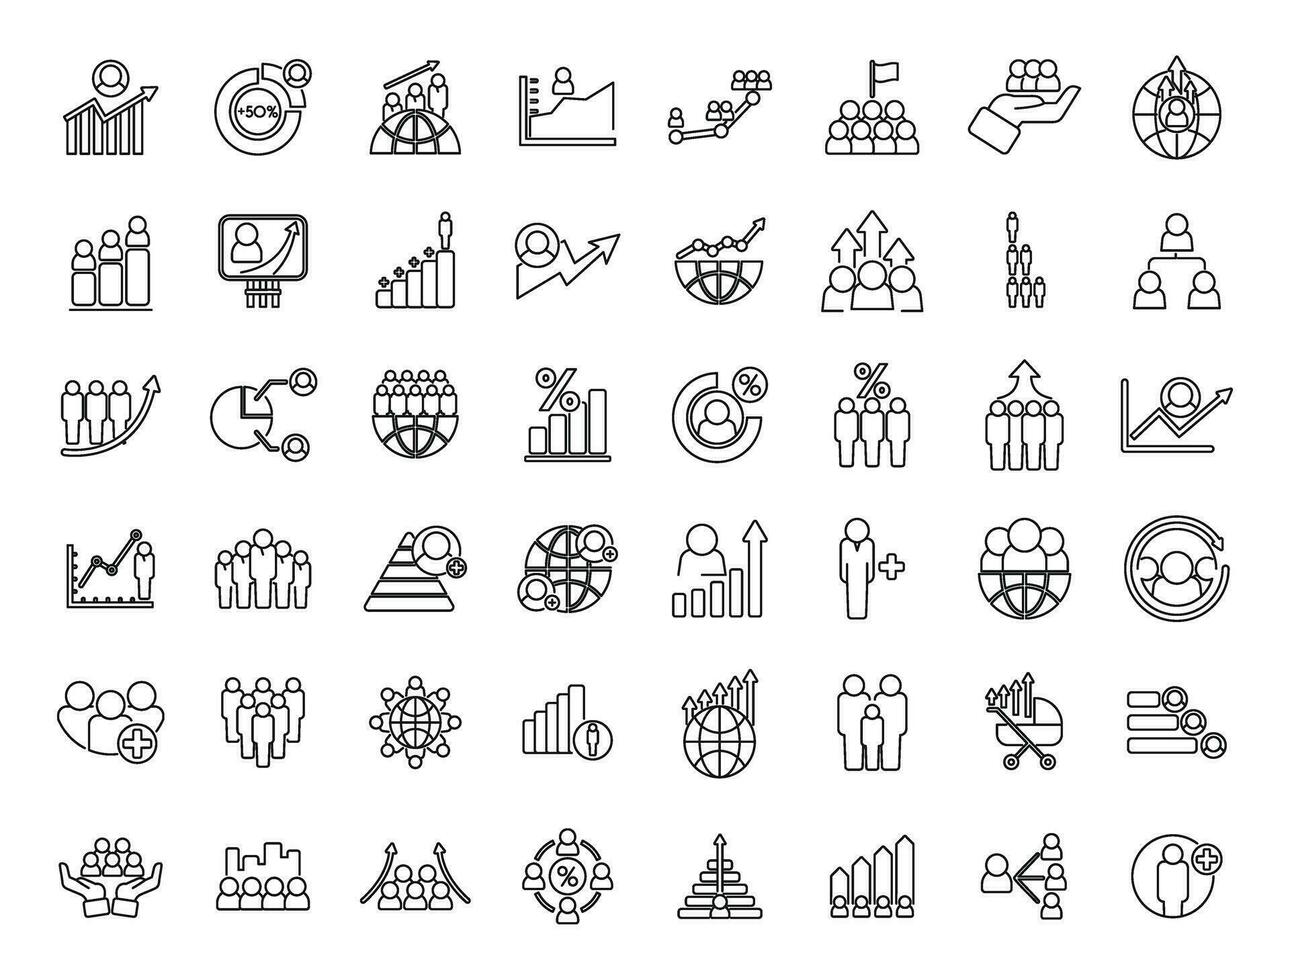 Population growth icons set outline vector. Population ability vector